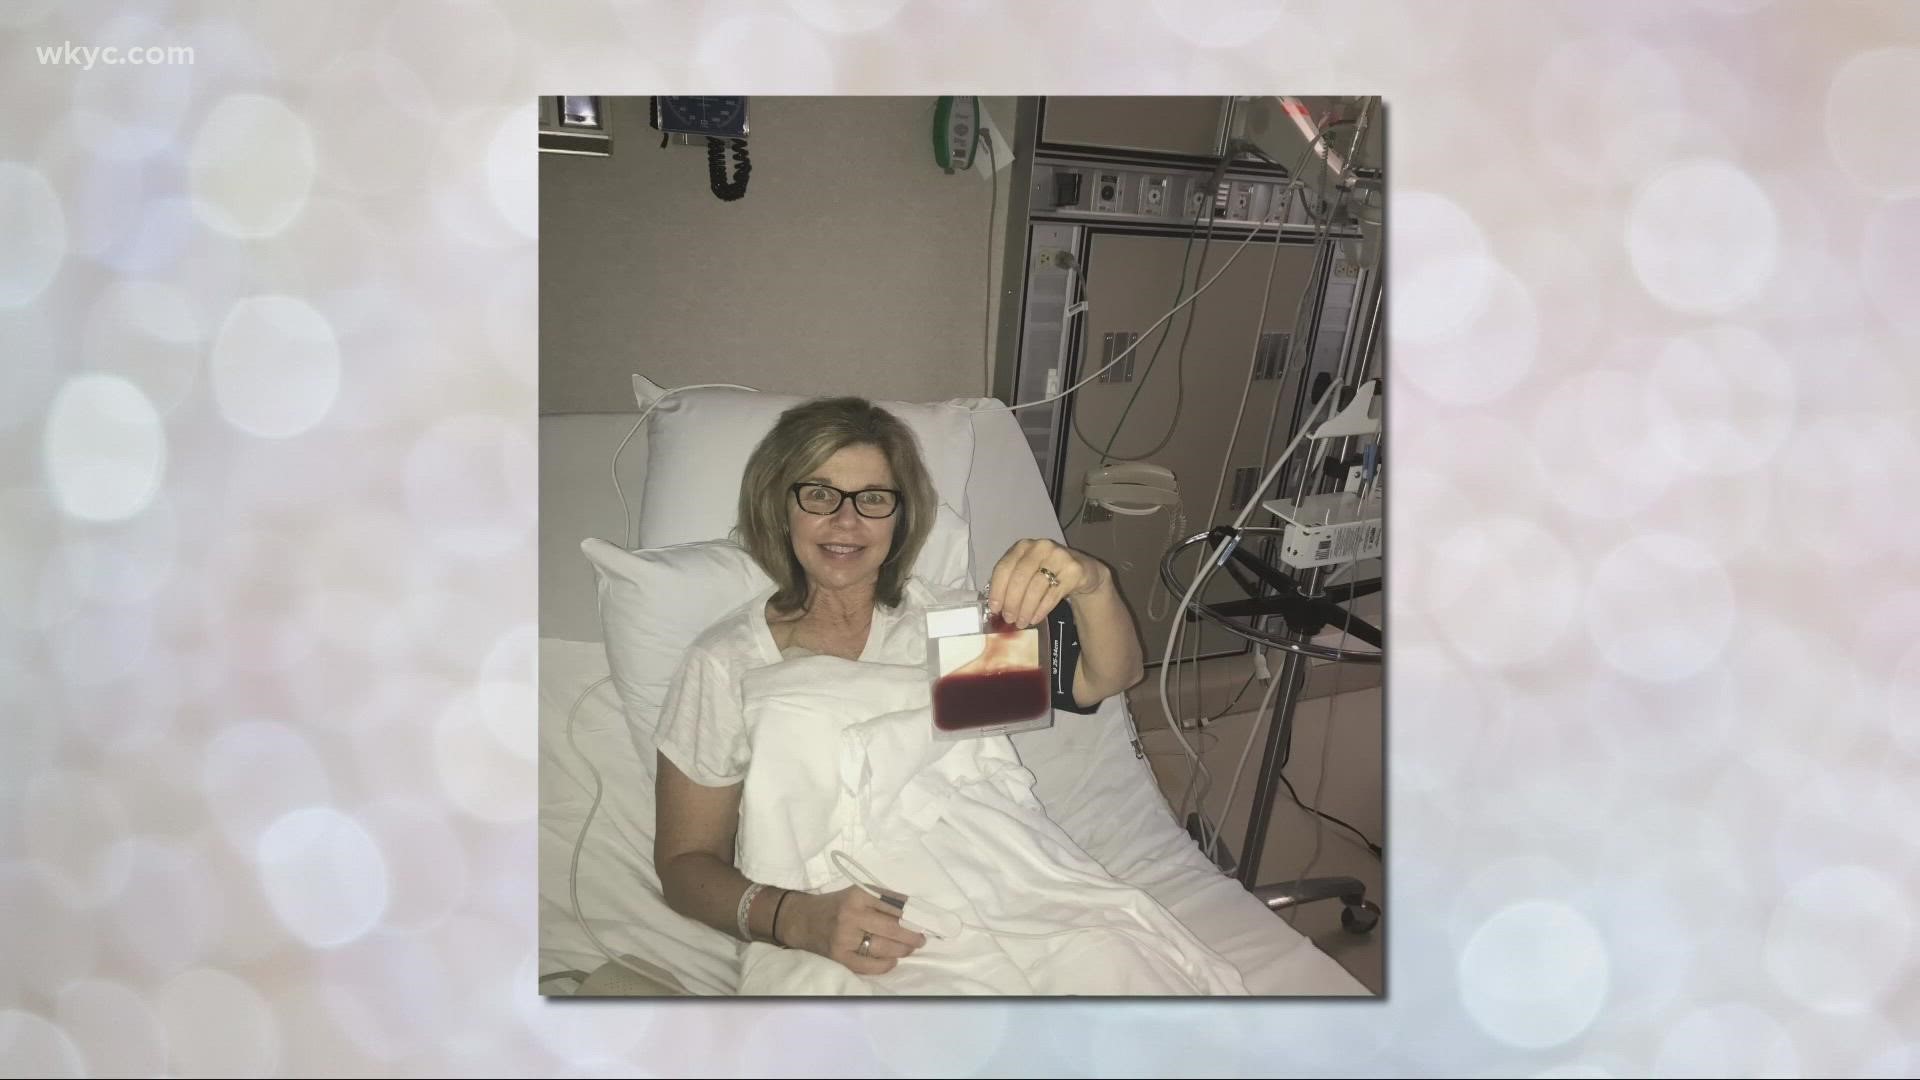 3News' Austin Love is raising money for the Multiple Myeloma Research Foundation as he shares his mom's story after her diagnosis.